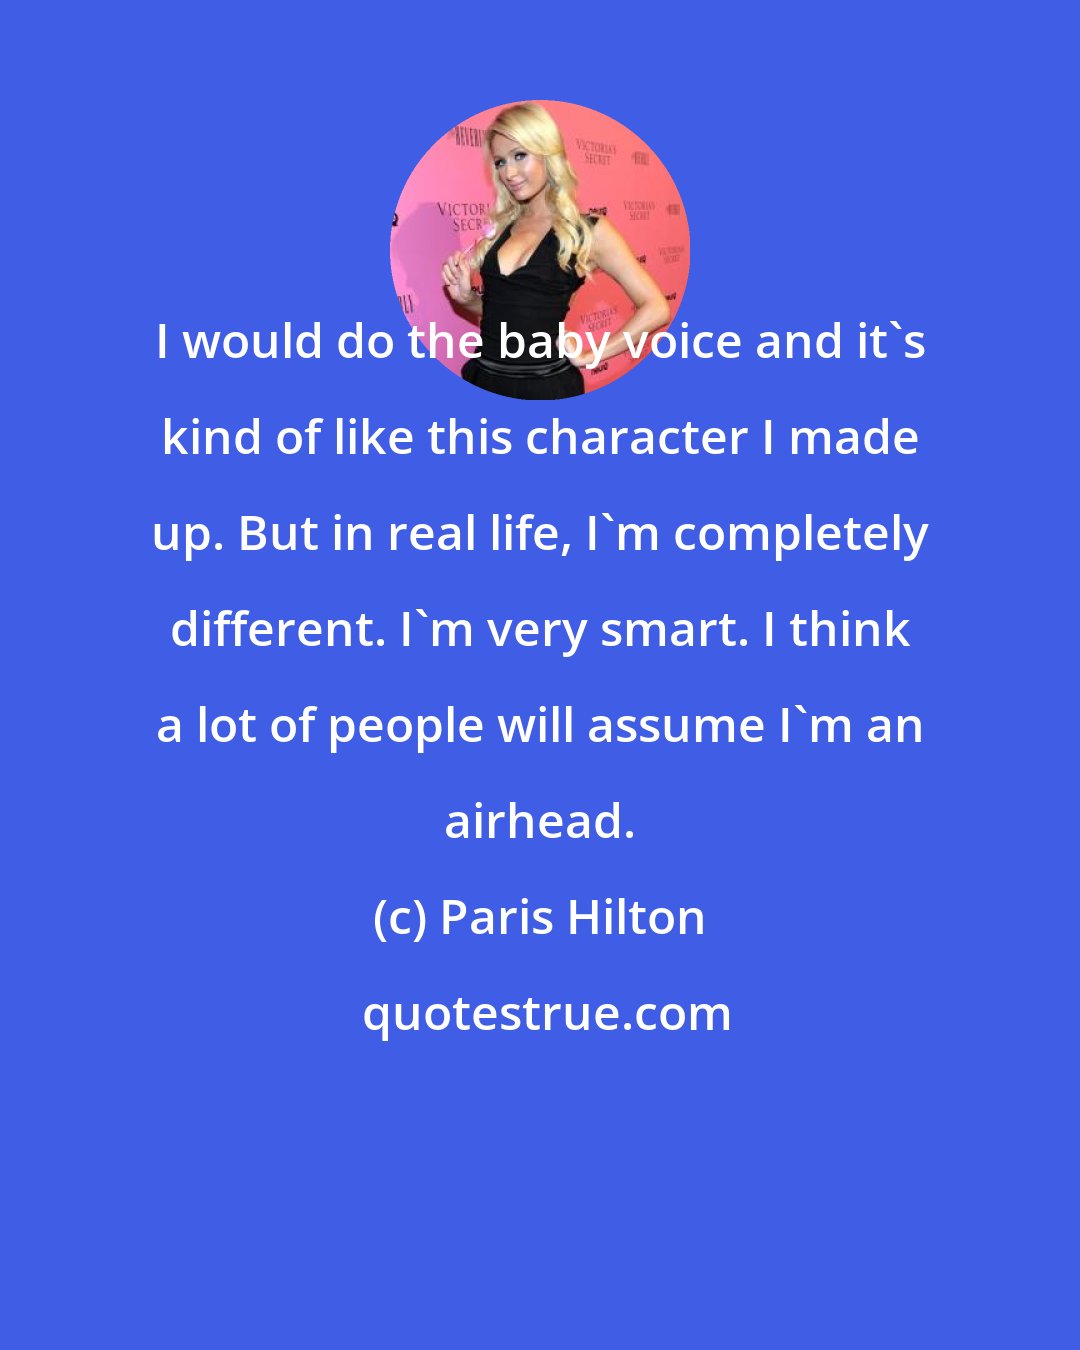 Paris Hilton: I would do the baby voice and it's kind of like this character I made up. But in real life, I'm completely different. I'm very smart. I think a lot of people will assume I'm an airhead.